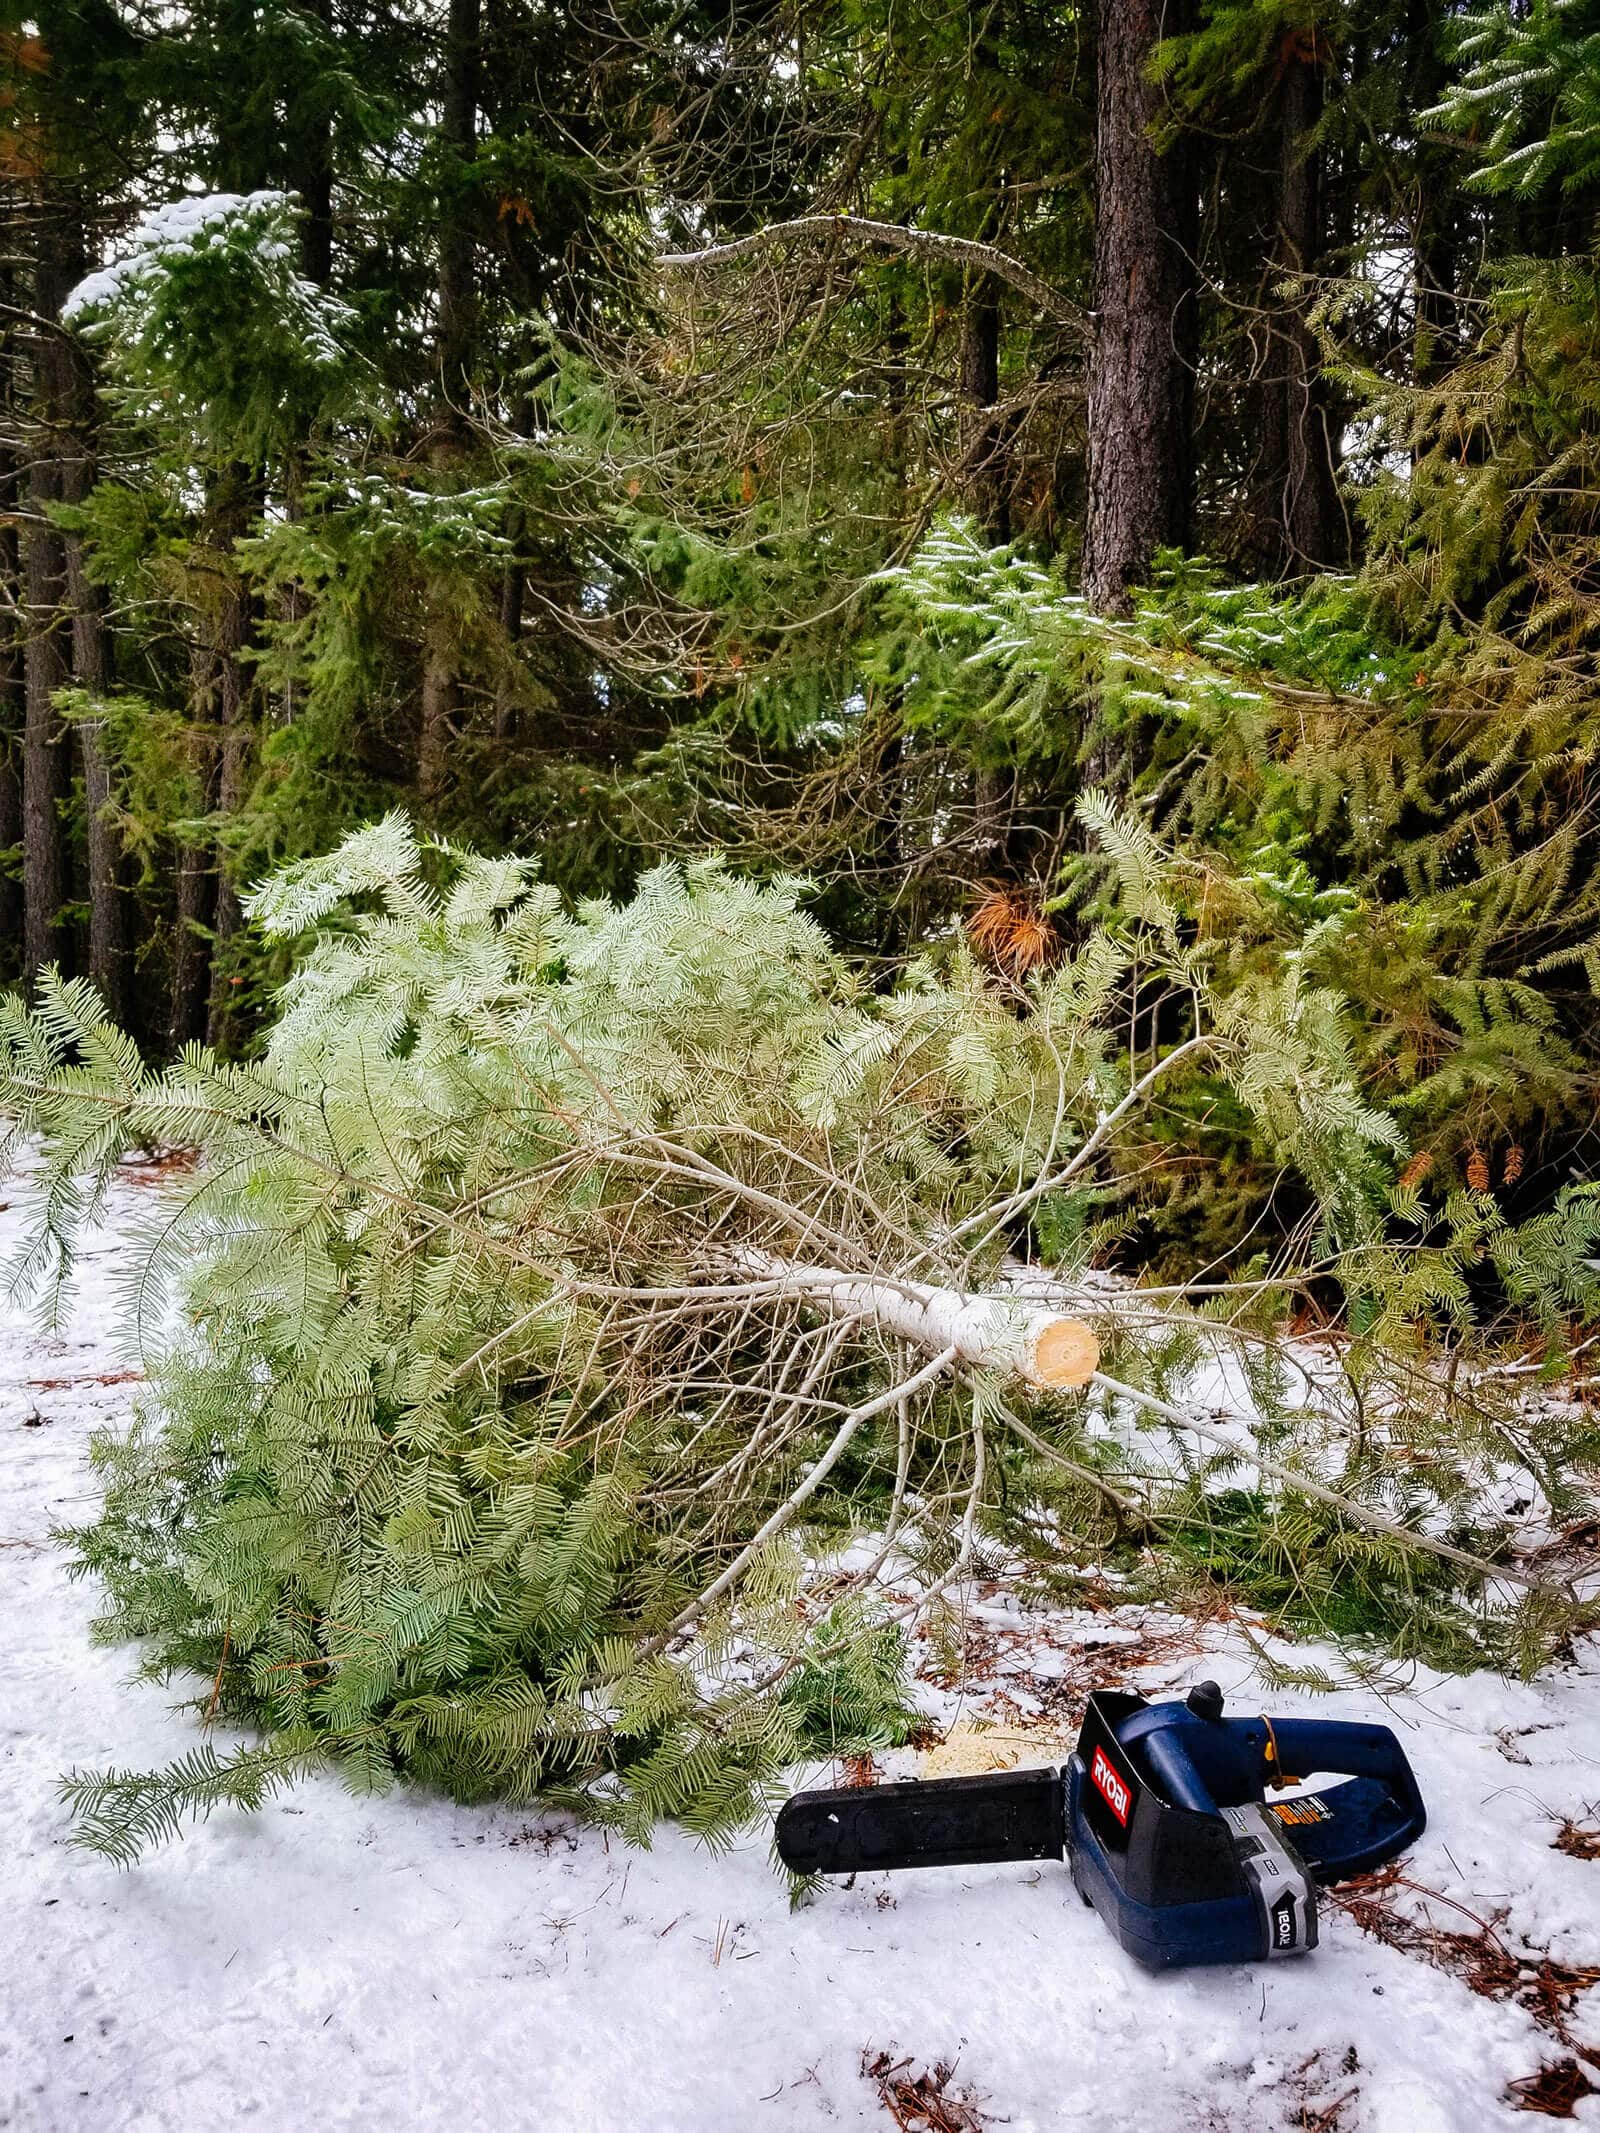 A freshly cut fir tree in a snowy forest, with a chainsaw next to it